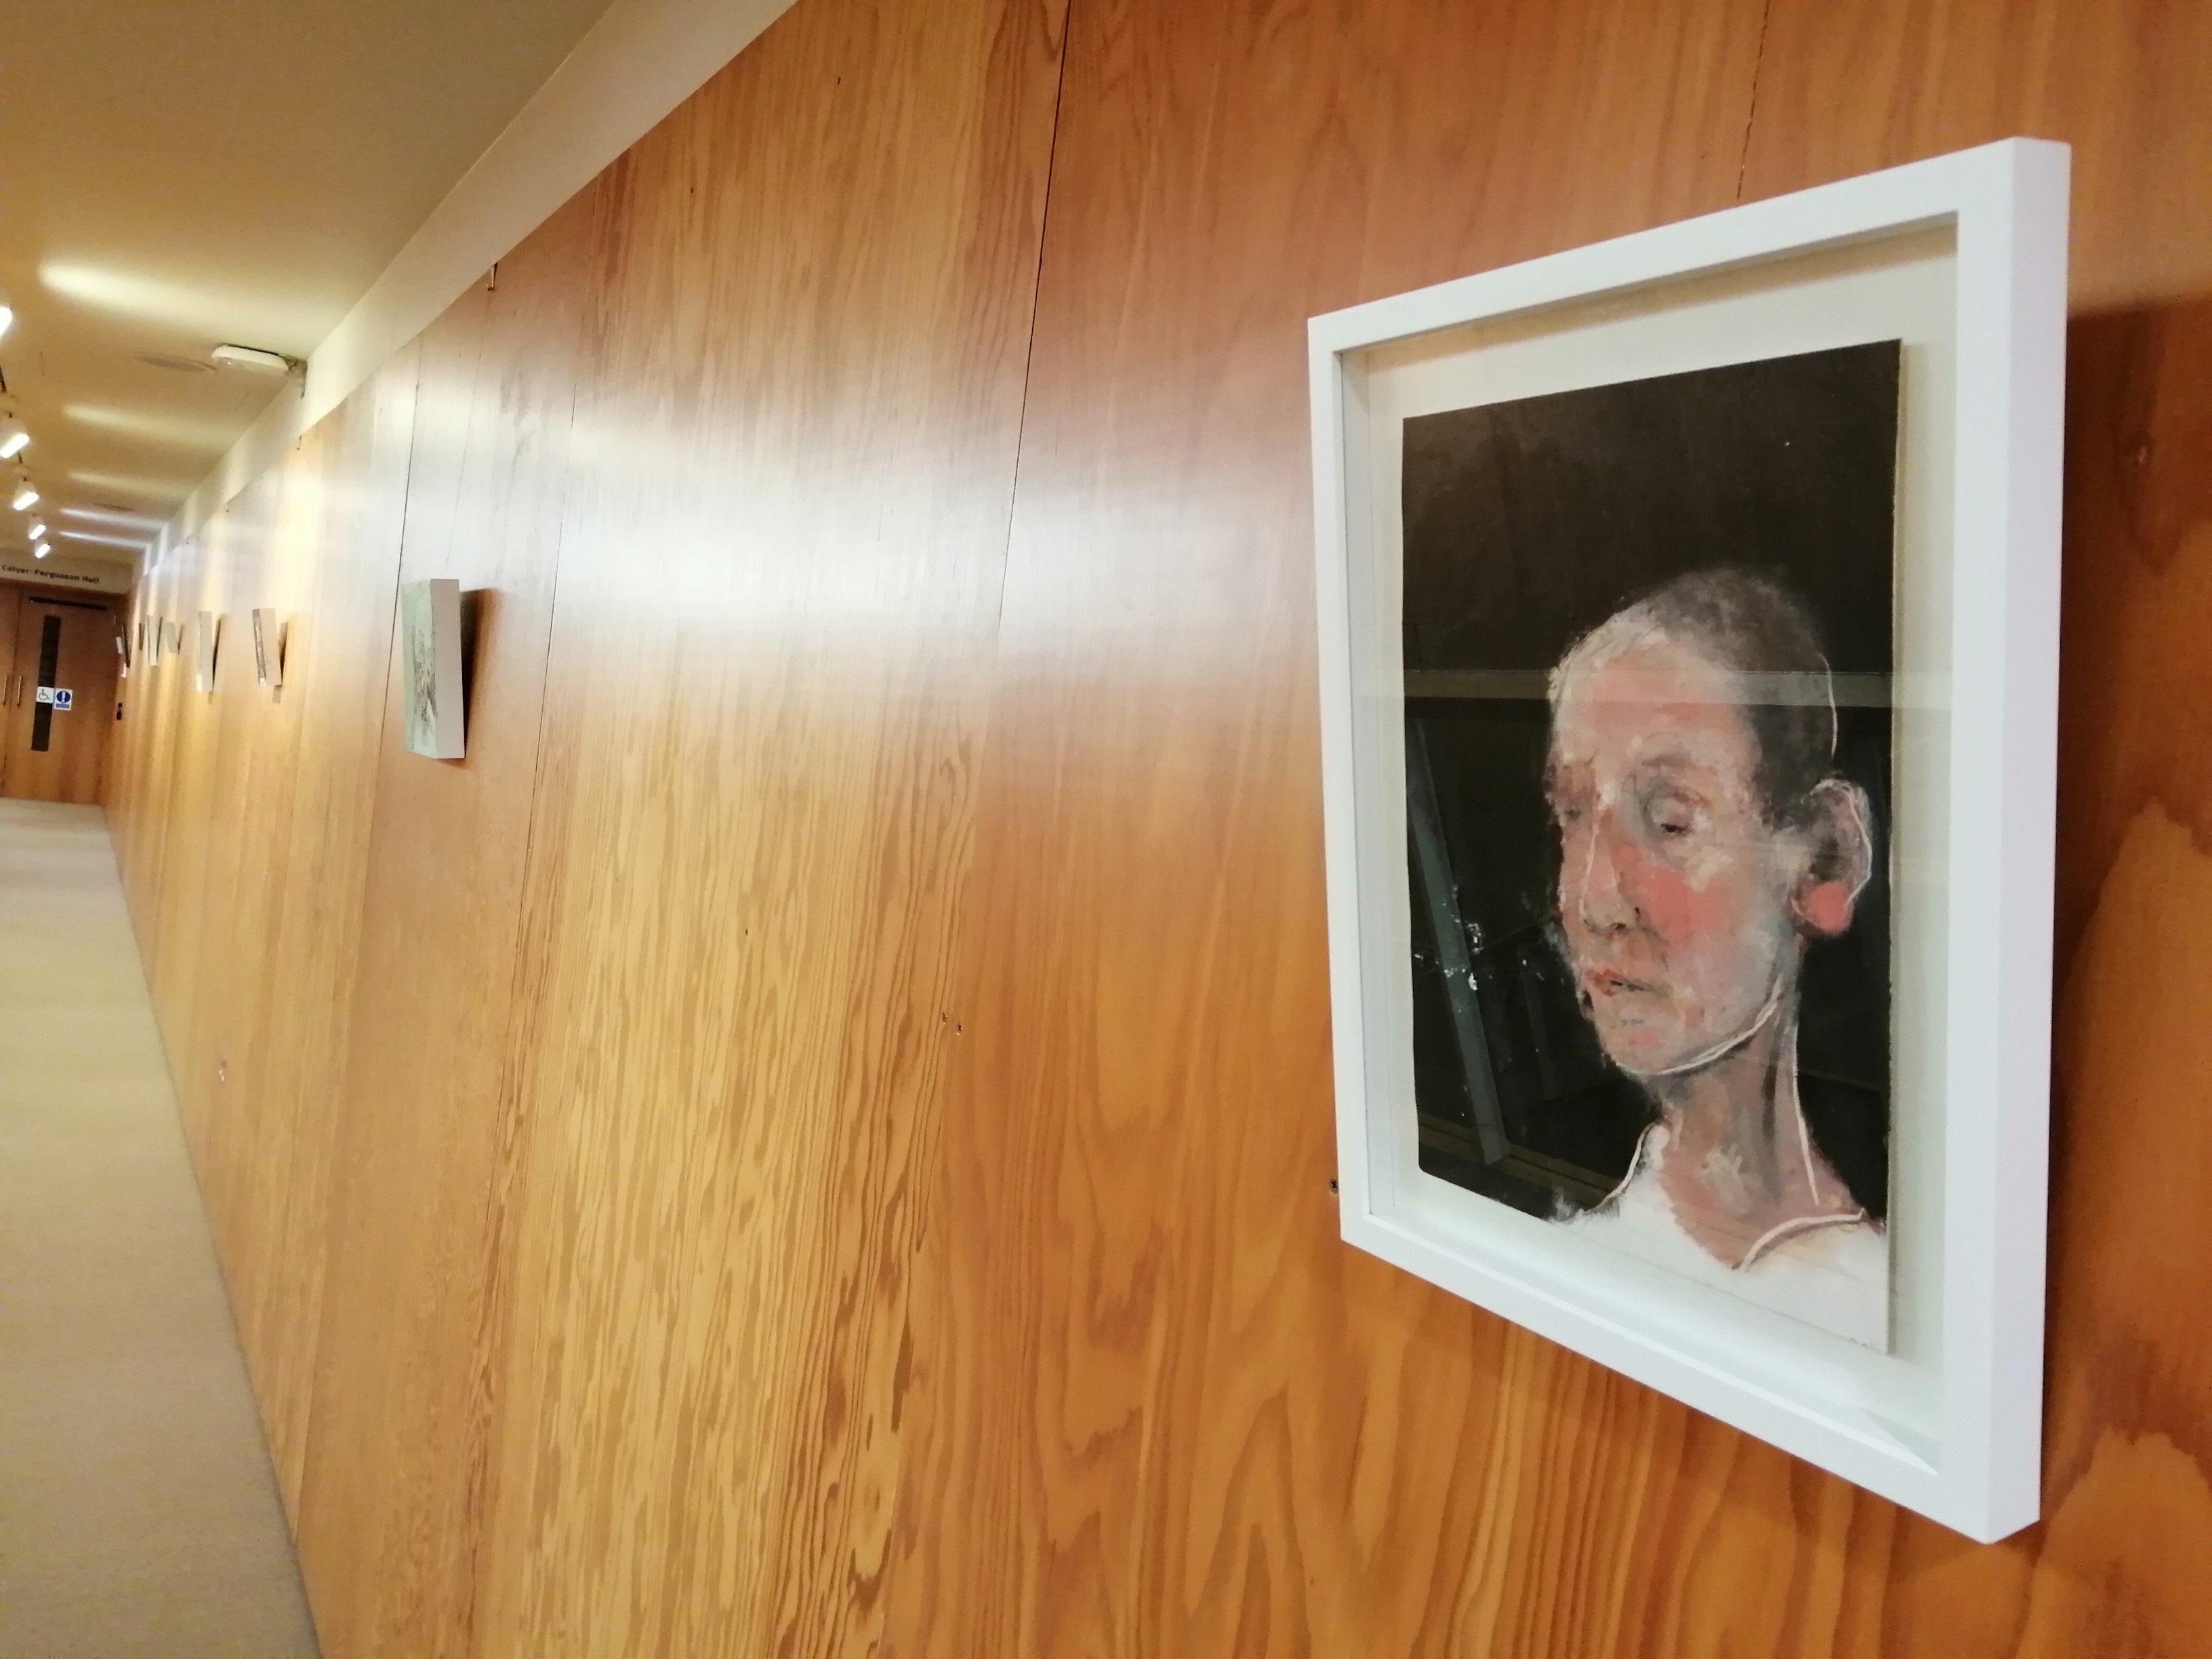 On the face of it: new portraiture exhibition in Colyer-Fergusson Gallery